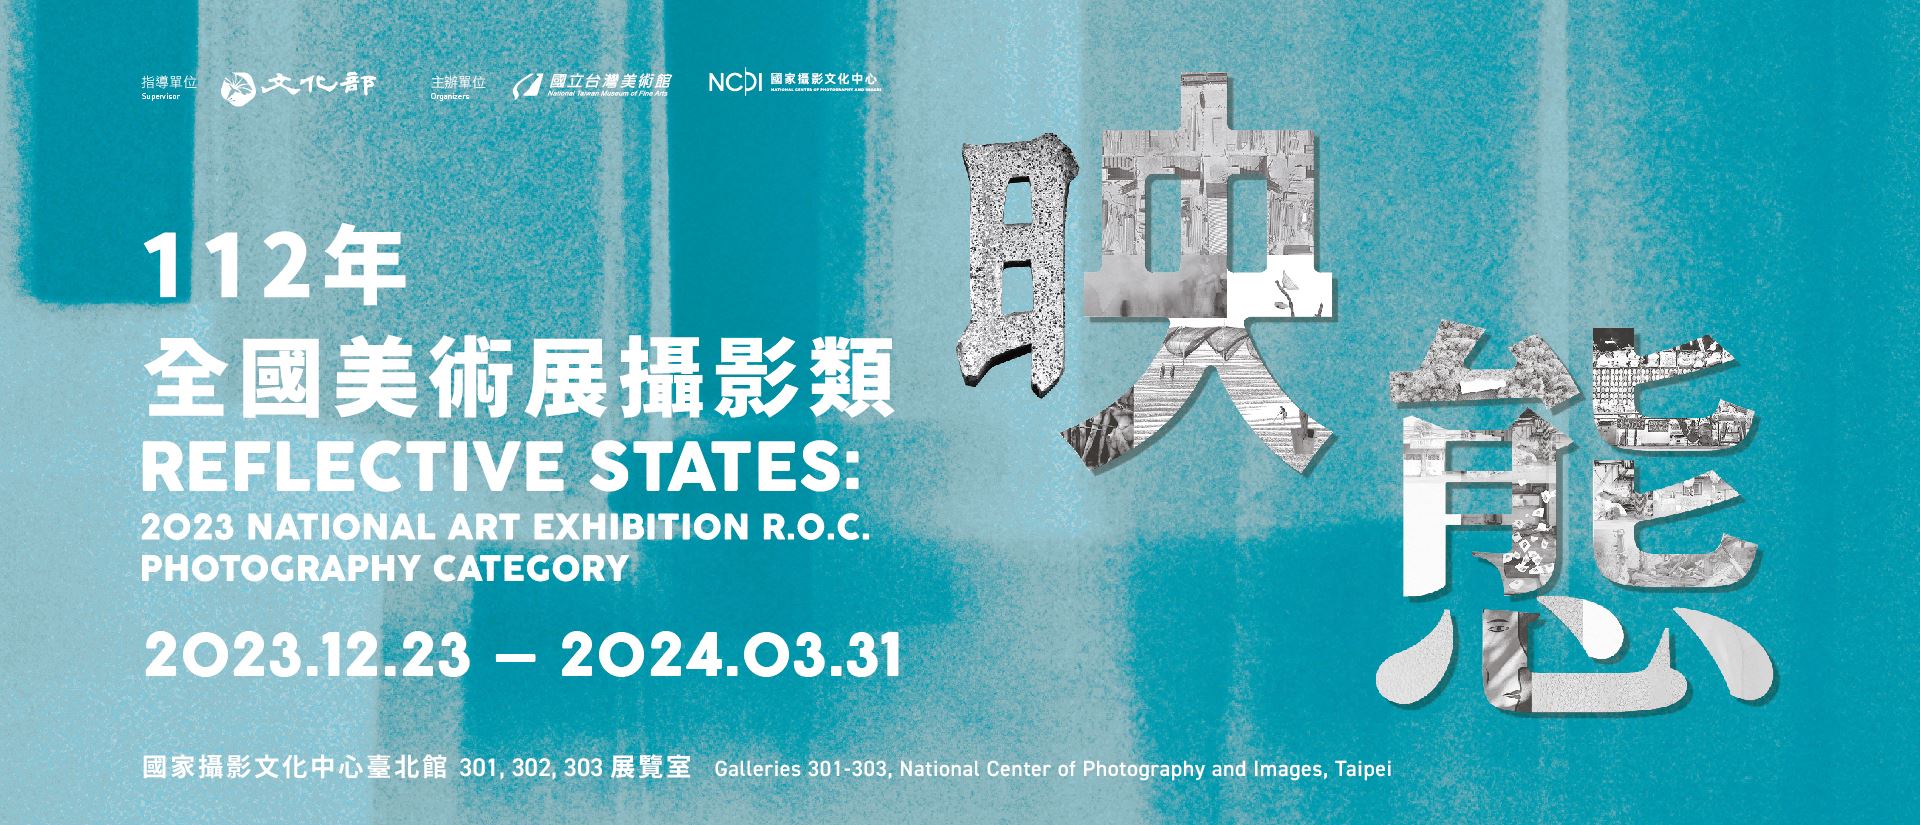   Reflective States: 2023 National Art Exhibition R.O.C. Photography Category